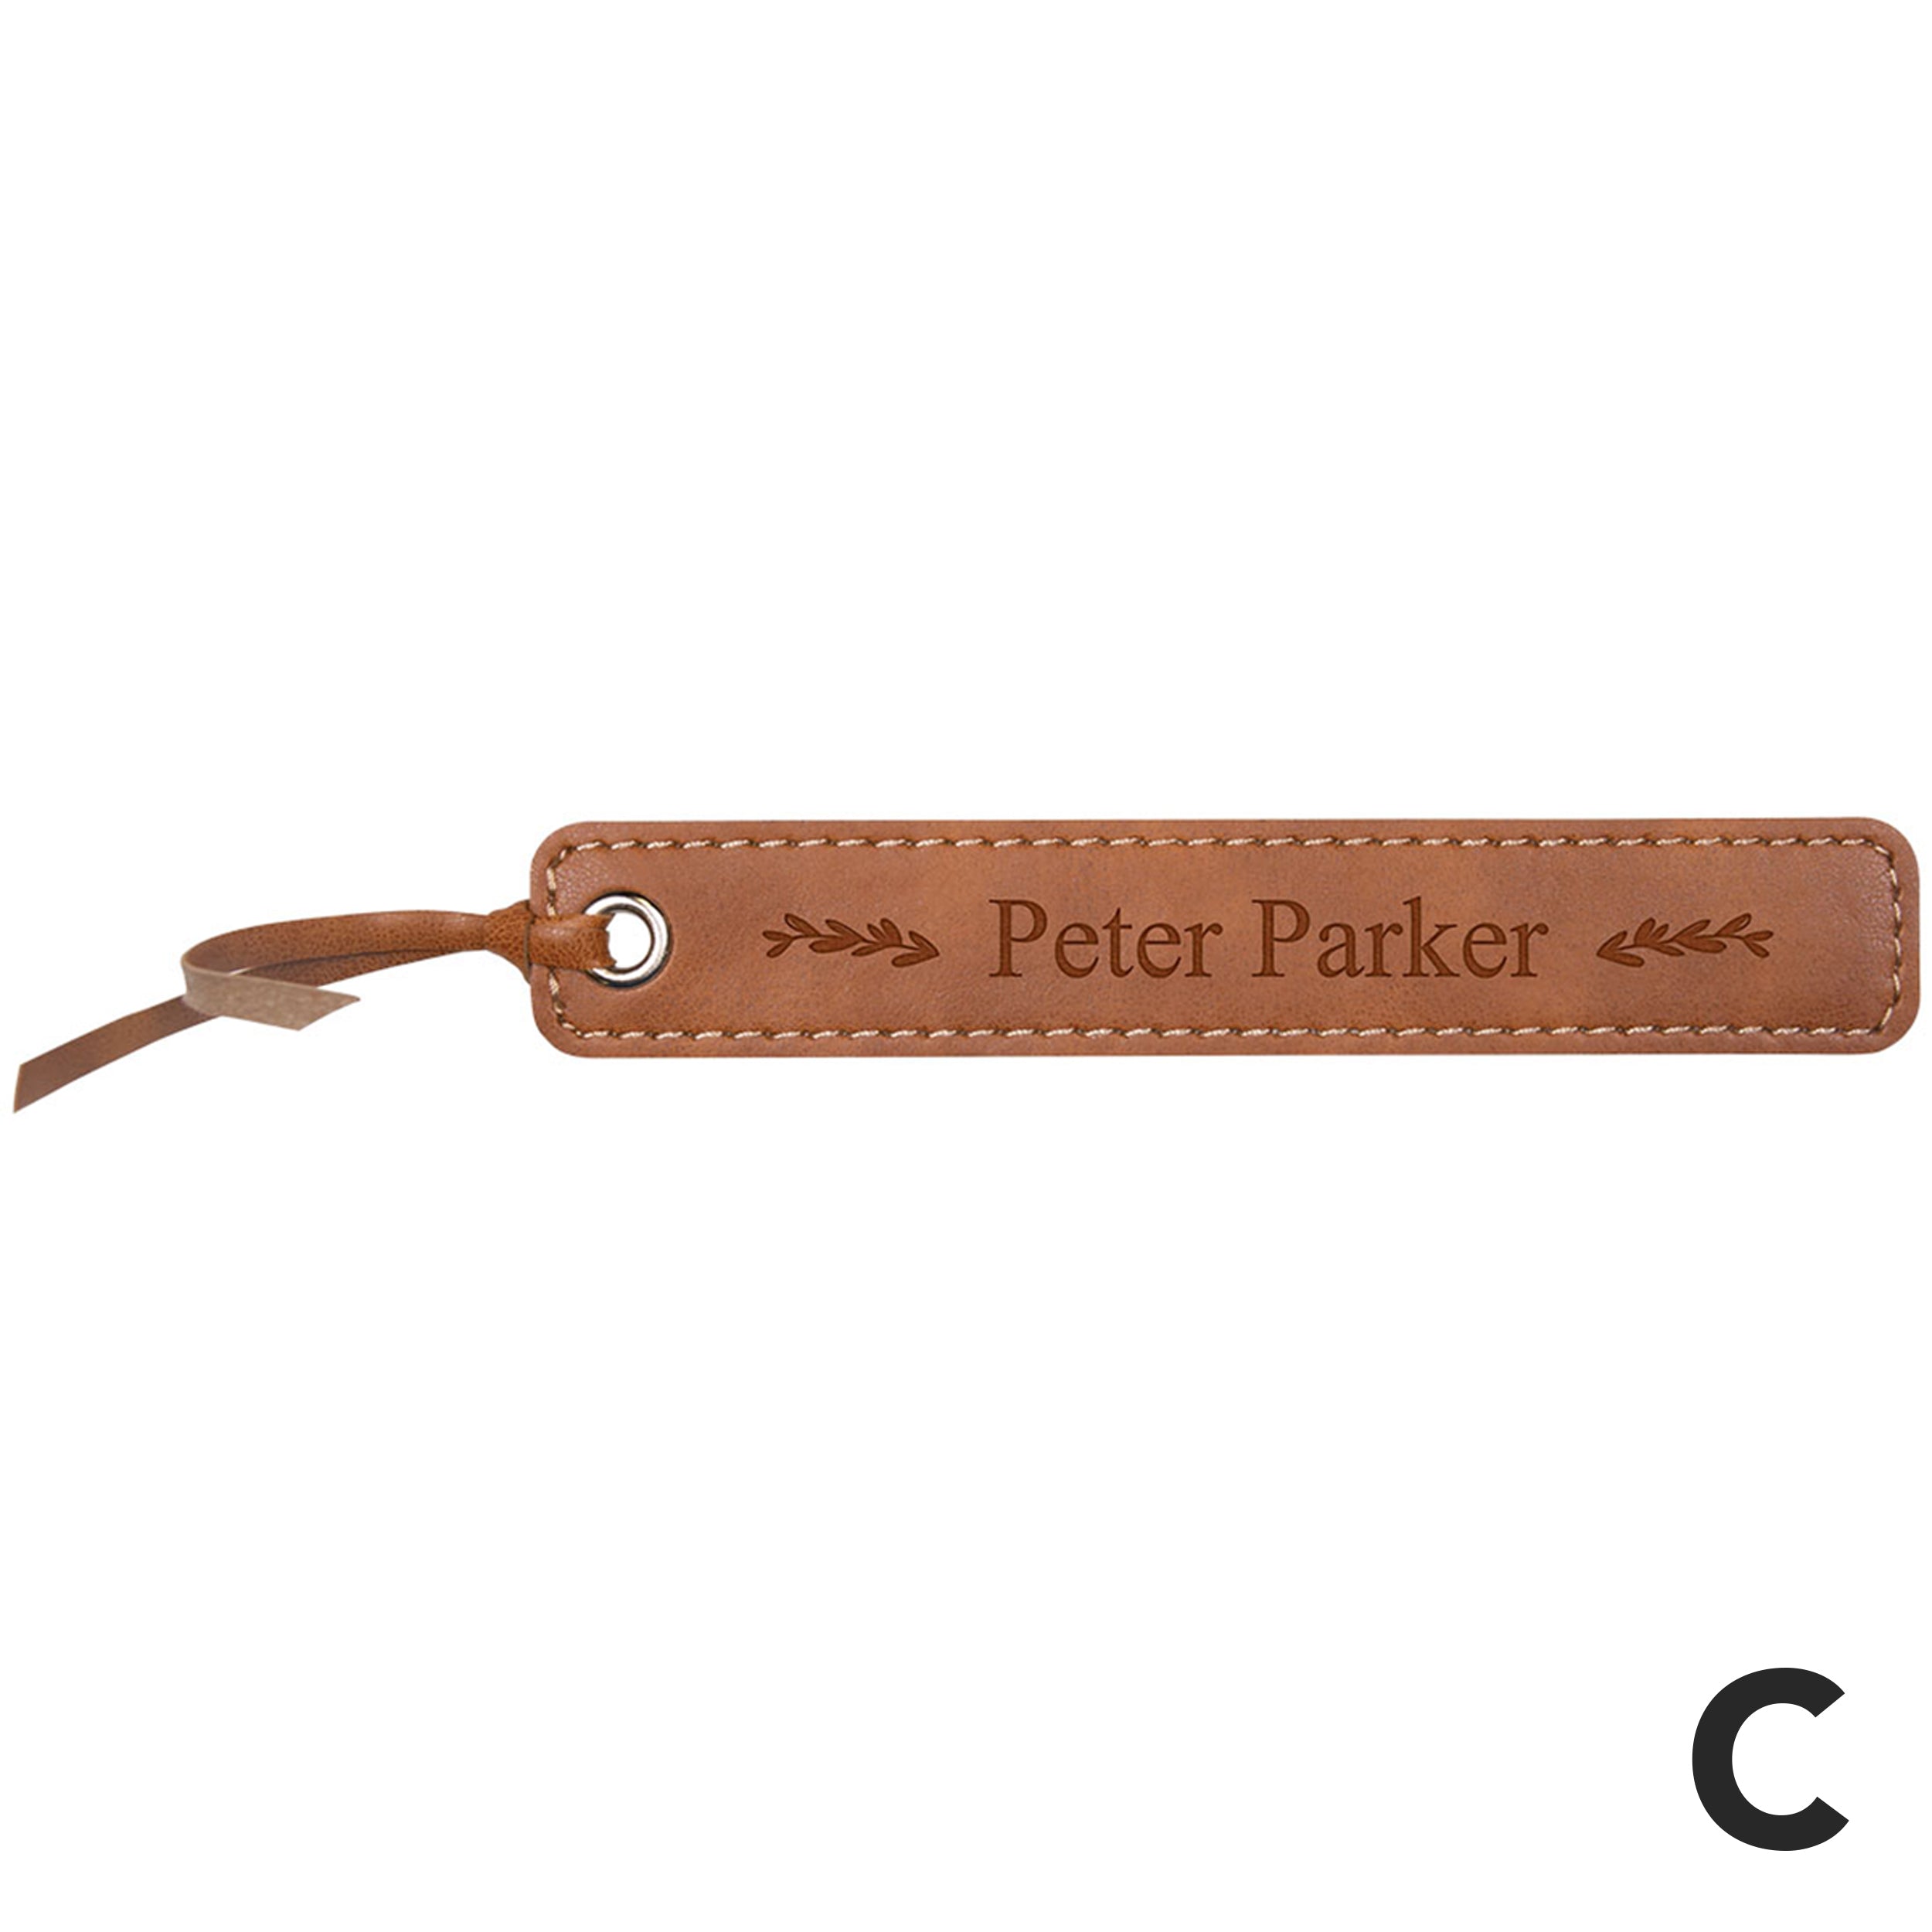 Personalized Tan Faux Leather Bookmark